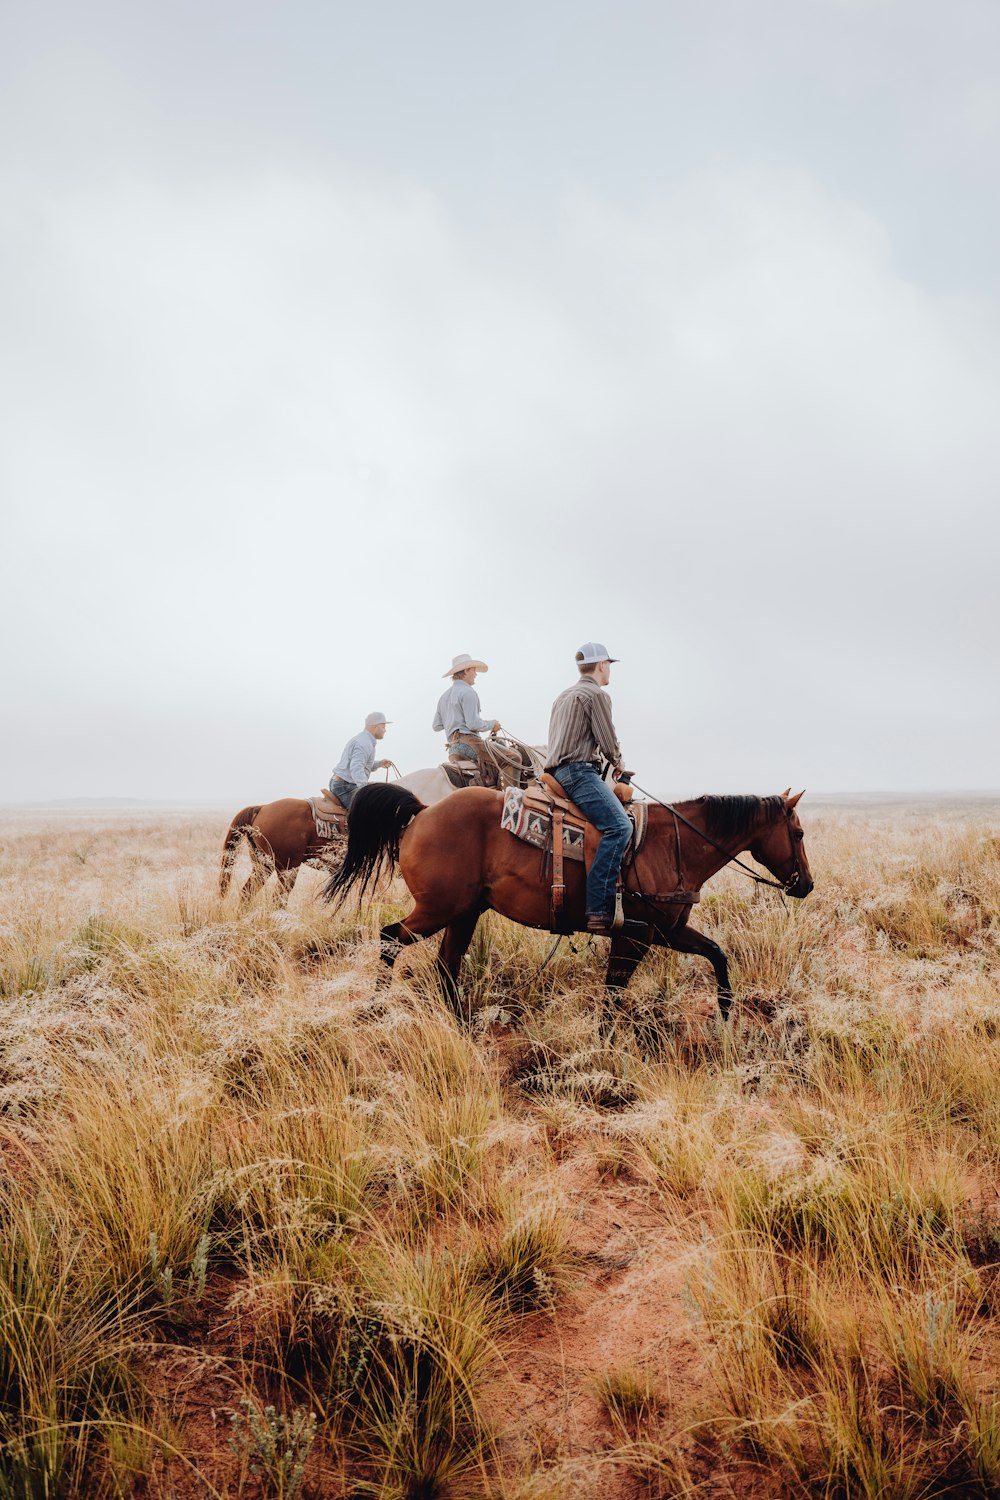 a group of people riding horses through a dry grass field